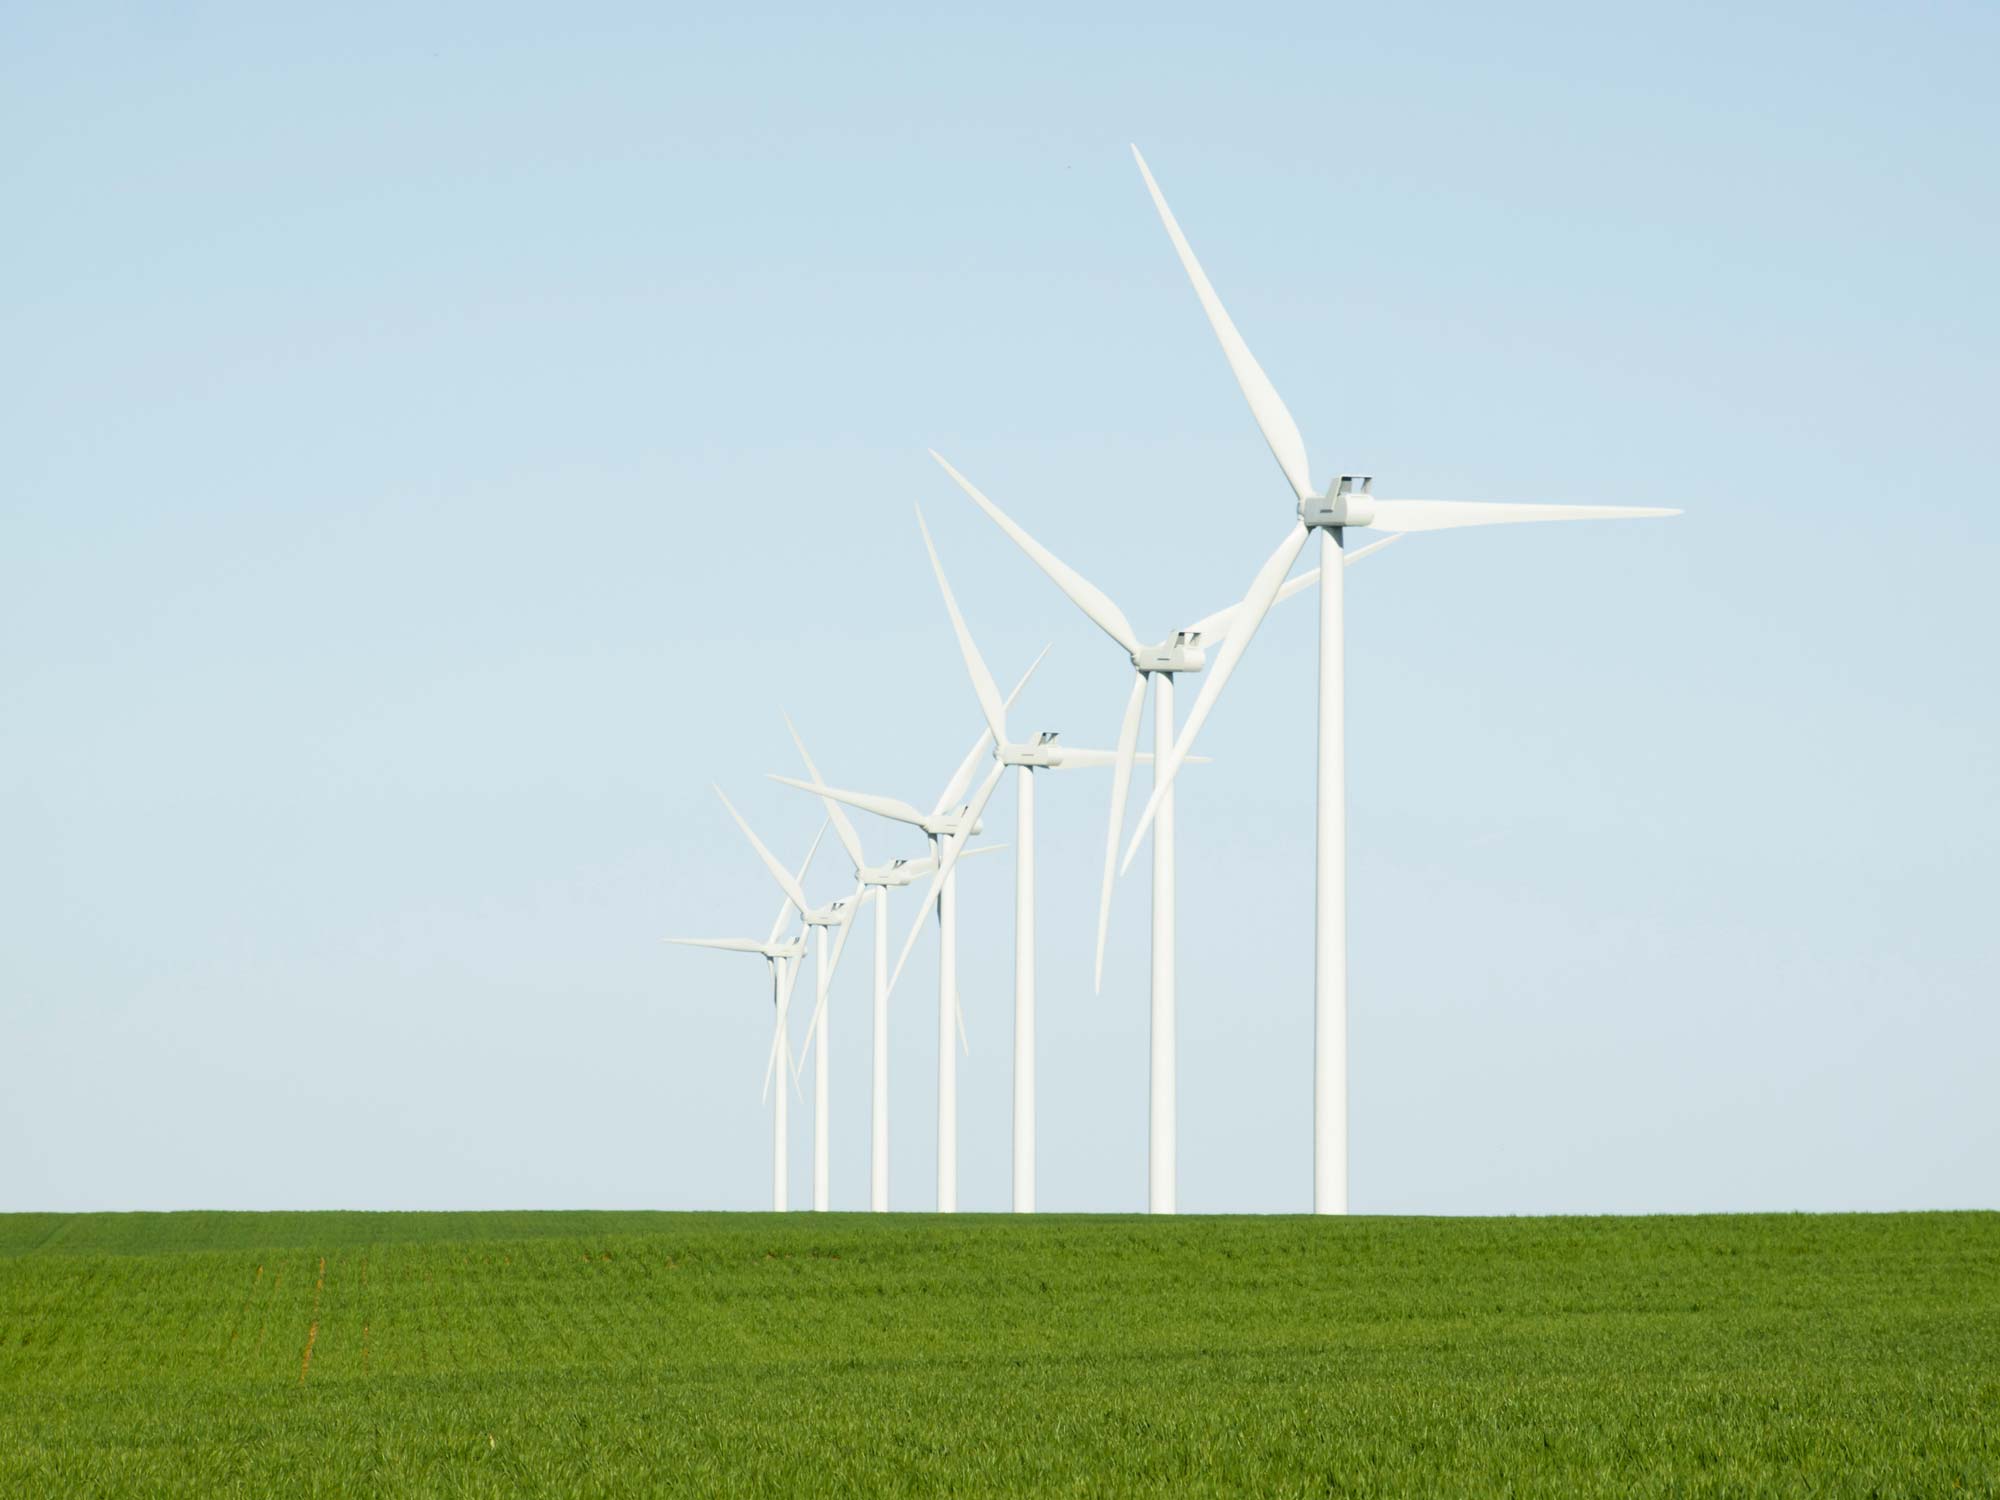 Smart rural connectivity wind turbines lined up in an agriculture field